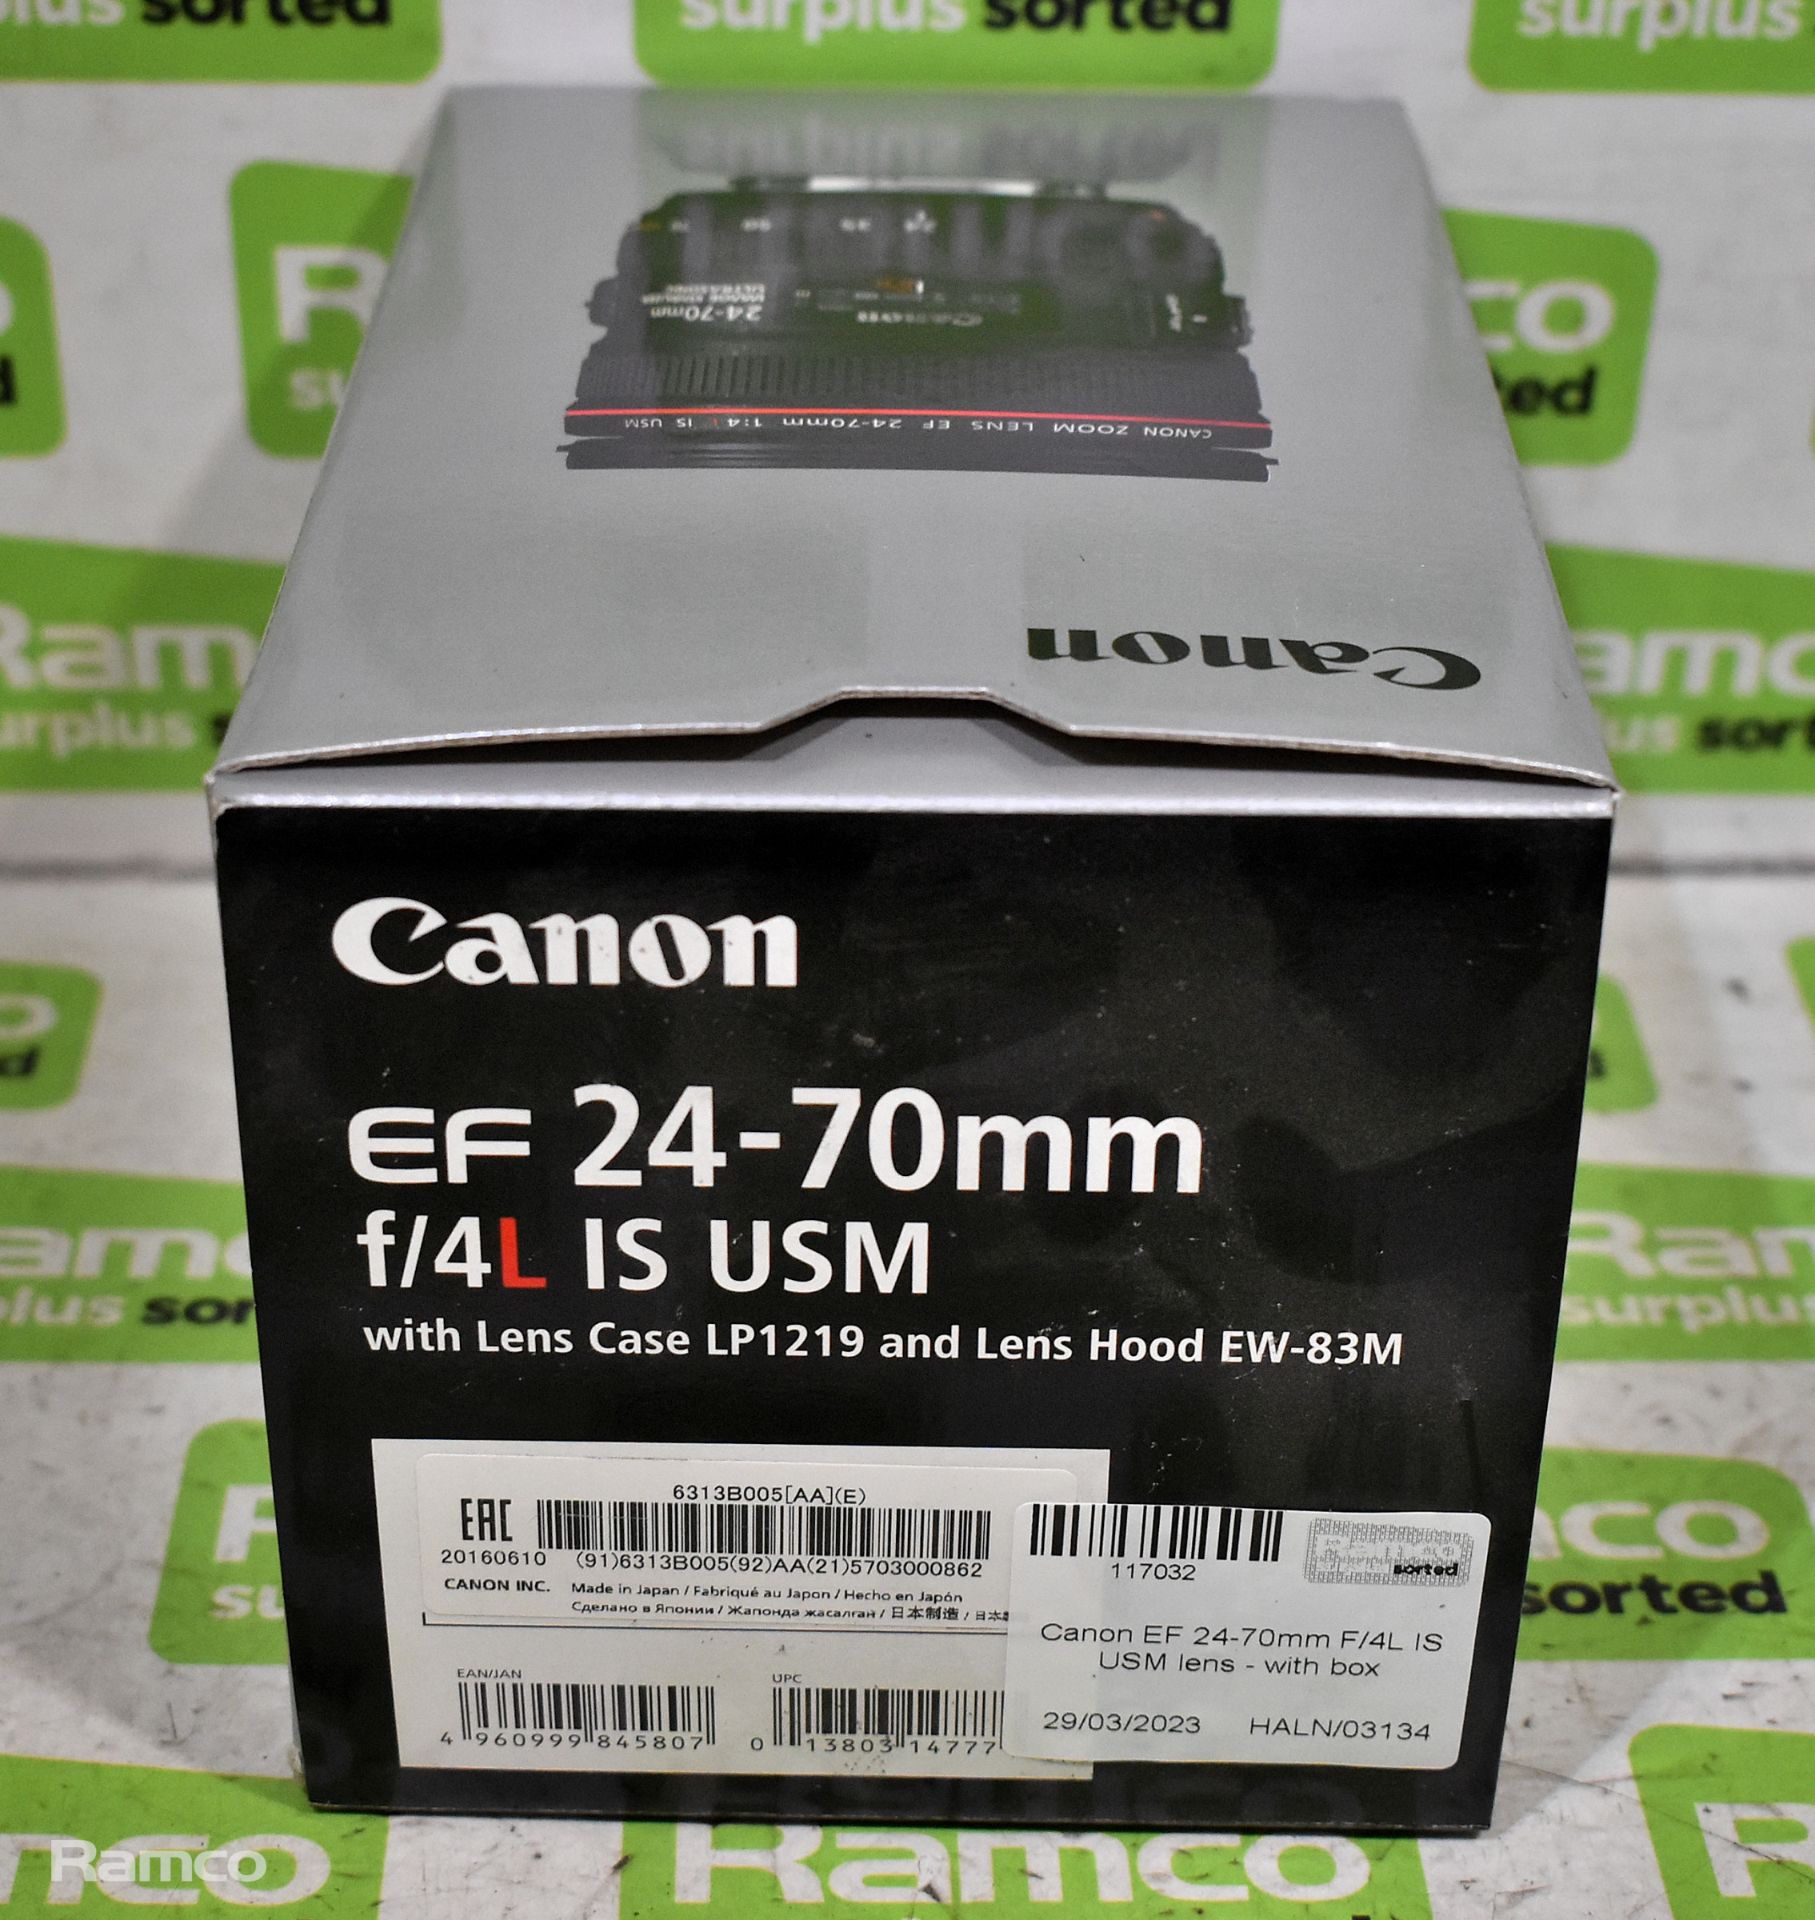 Canon EF 24-70mm F/4L IS USM lens - with box - Image 9 of 10